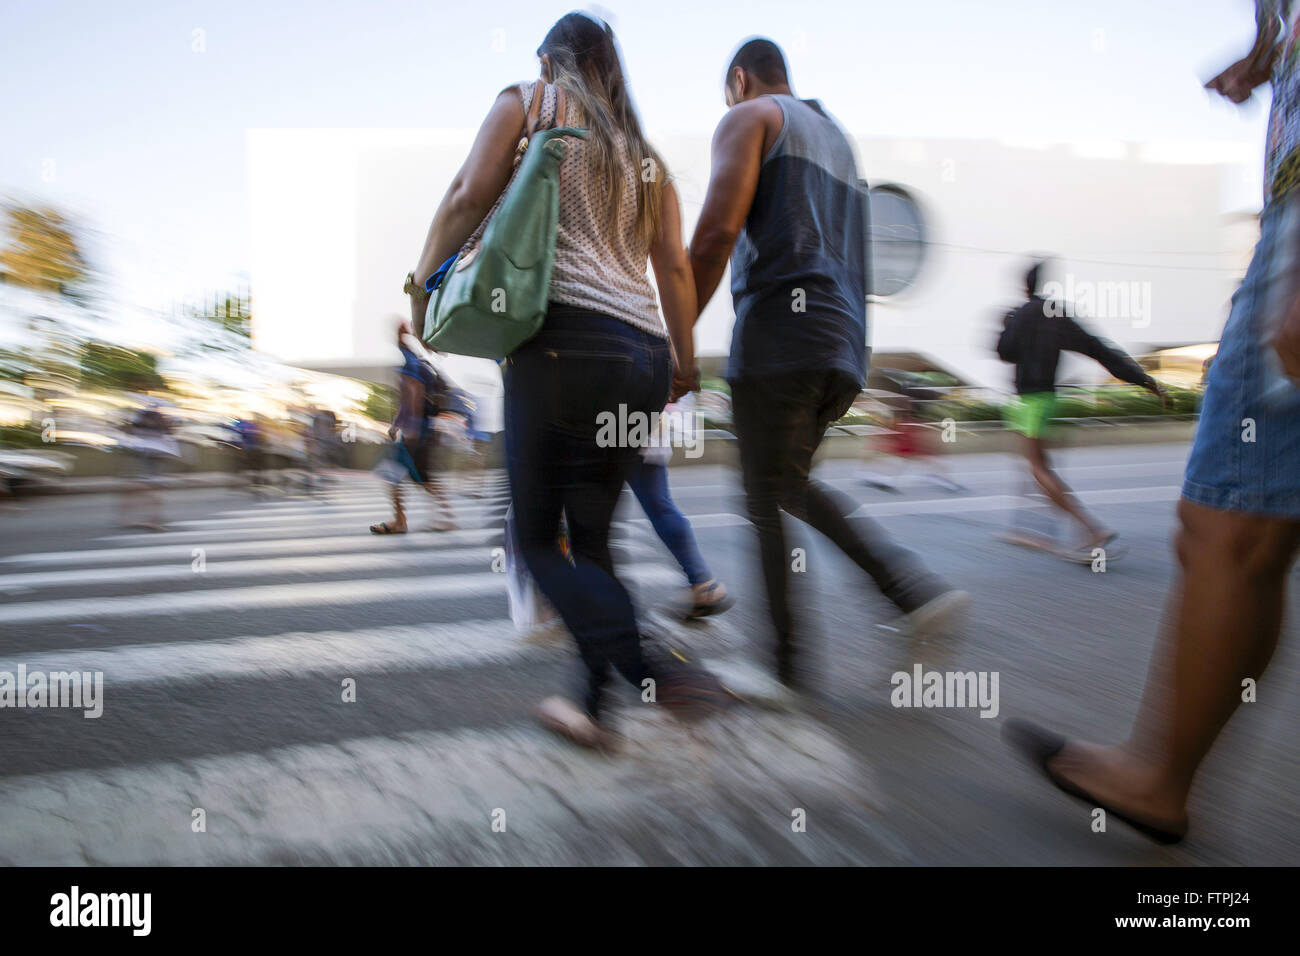 Pedestrians crossing street in the city center Stock Photo